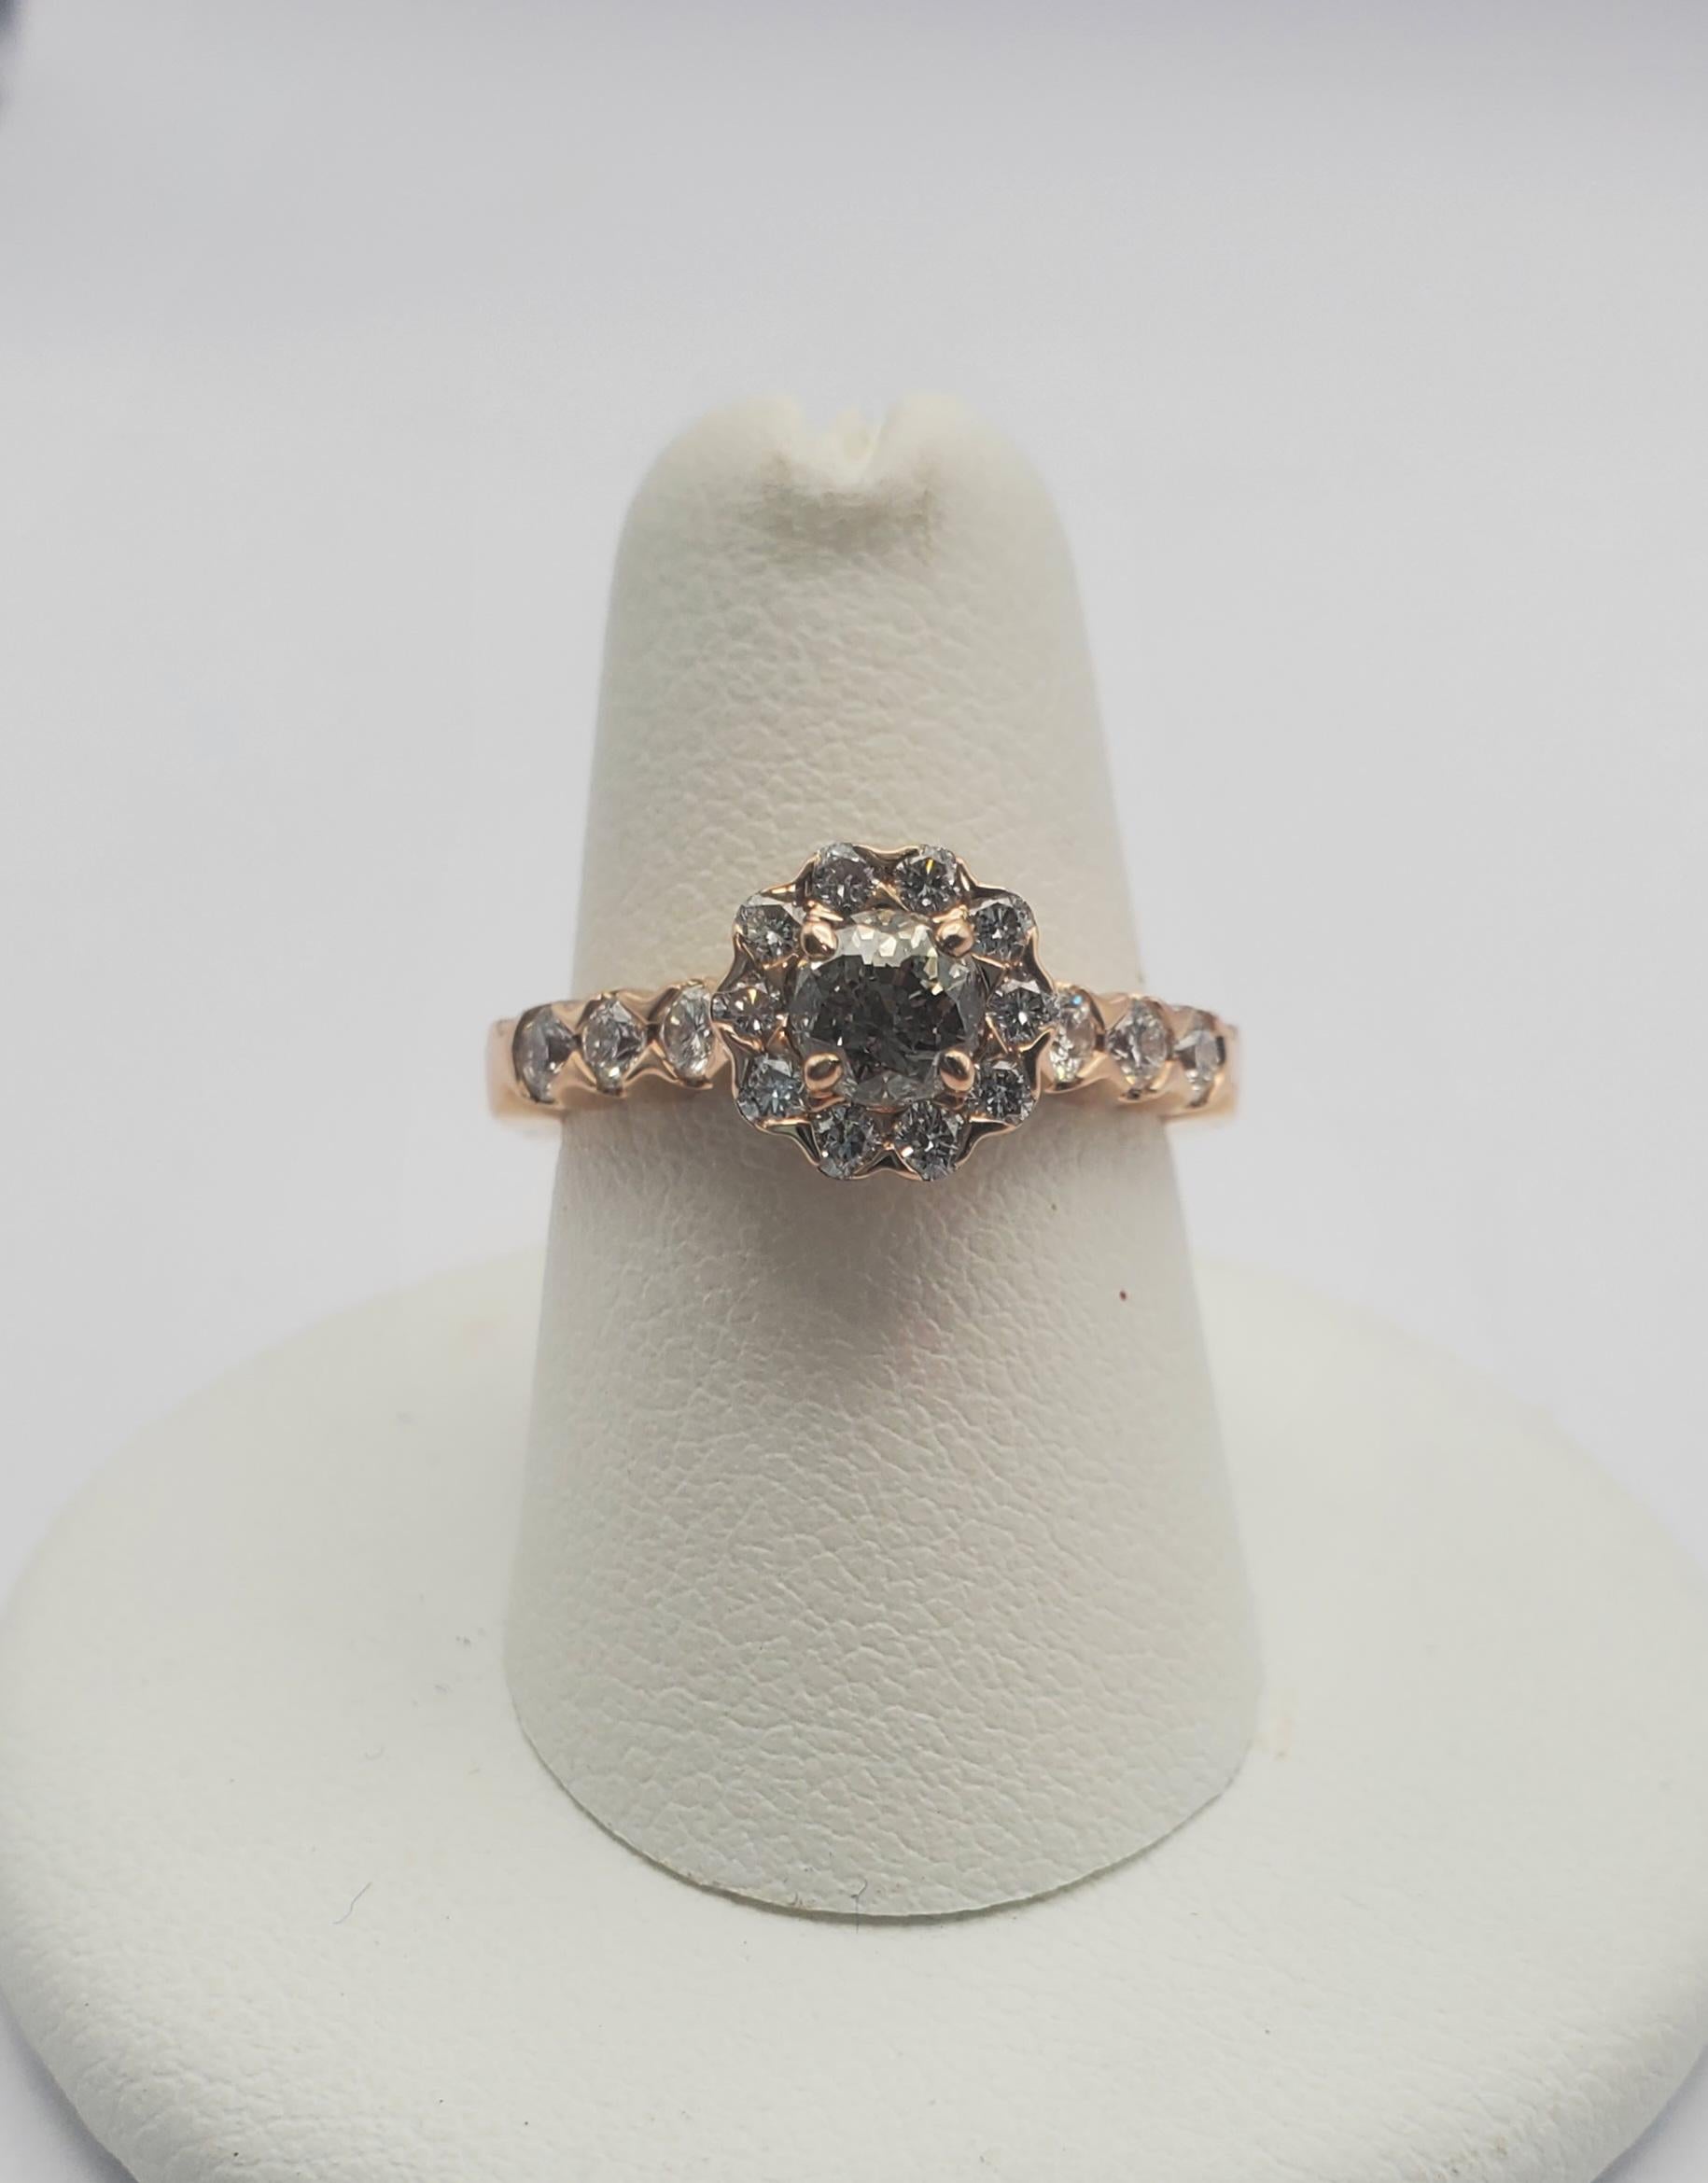 Stunning chocolate brown round diamond halo rose gold engagement ring. The center stone is a 0.40ct round chocolate diamond, surrounded by a halo of white diamonds. The chocolate diamond is C5 in color and SI1 in clarity. The white diamonds in the